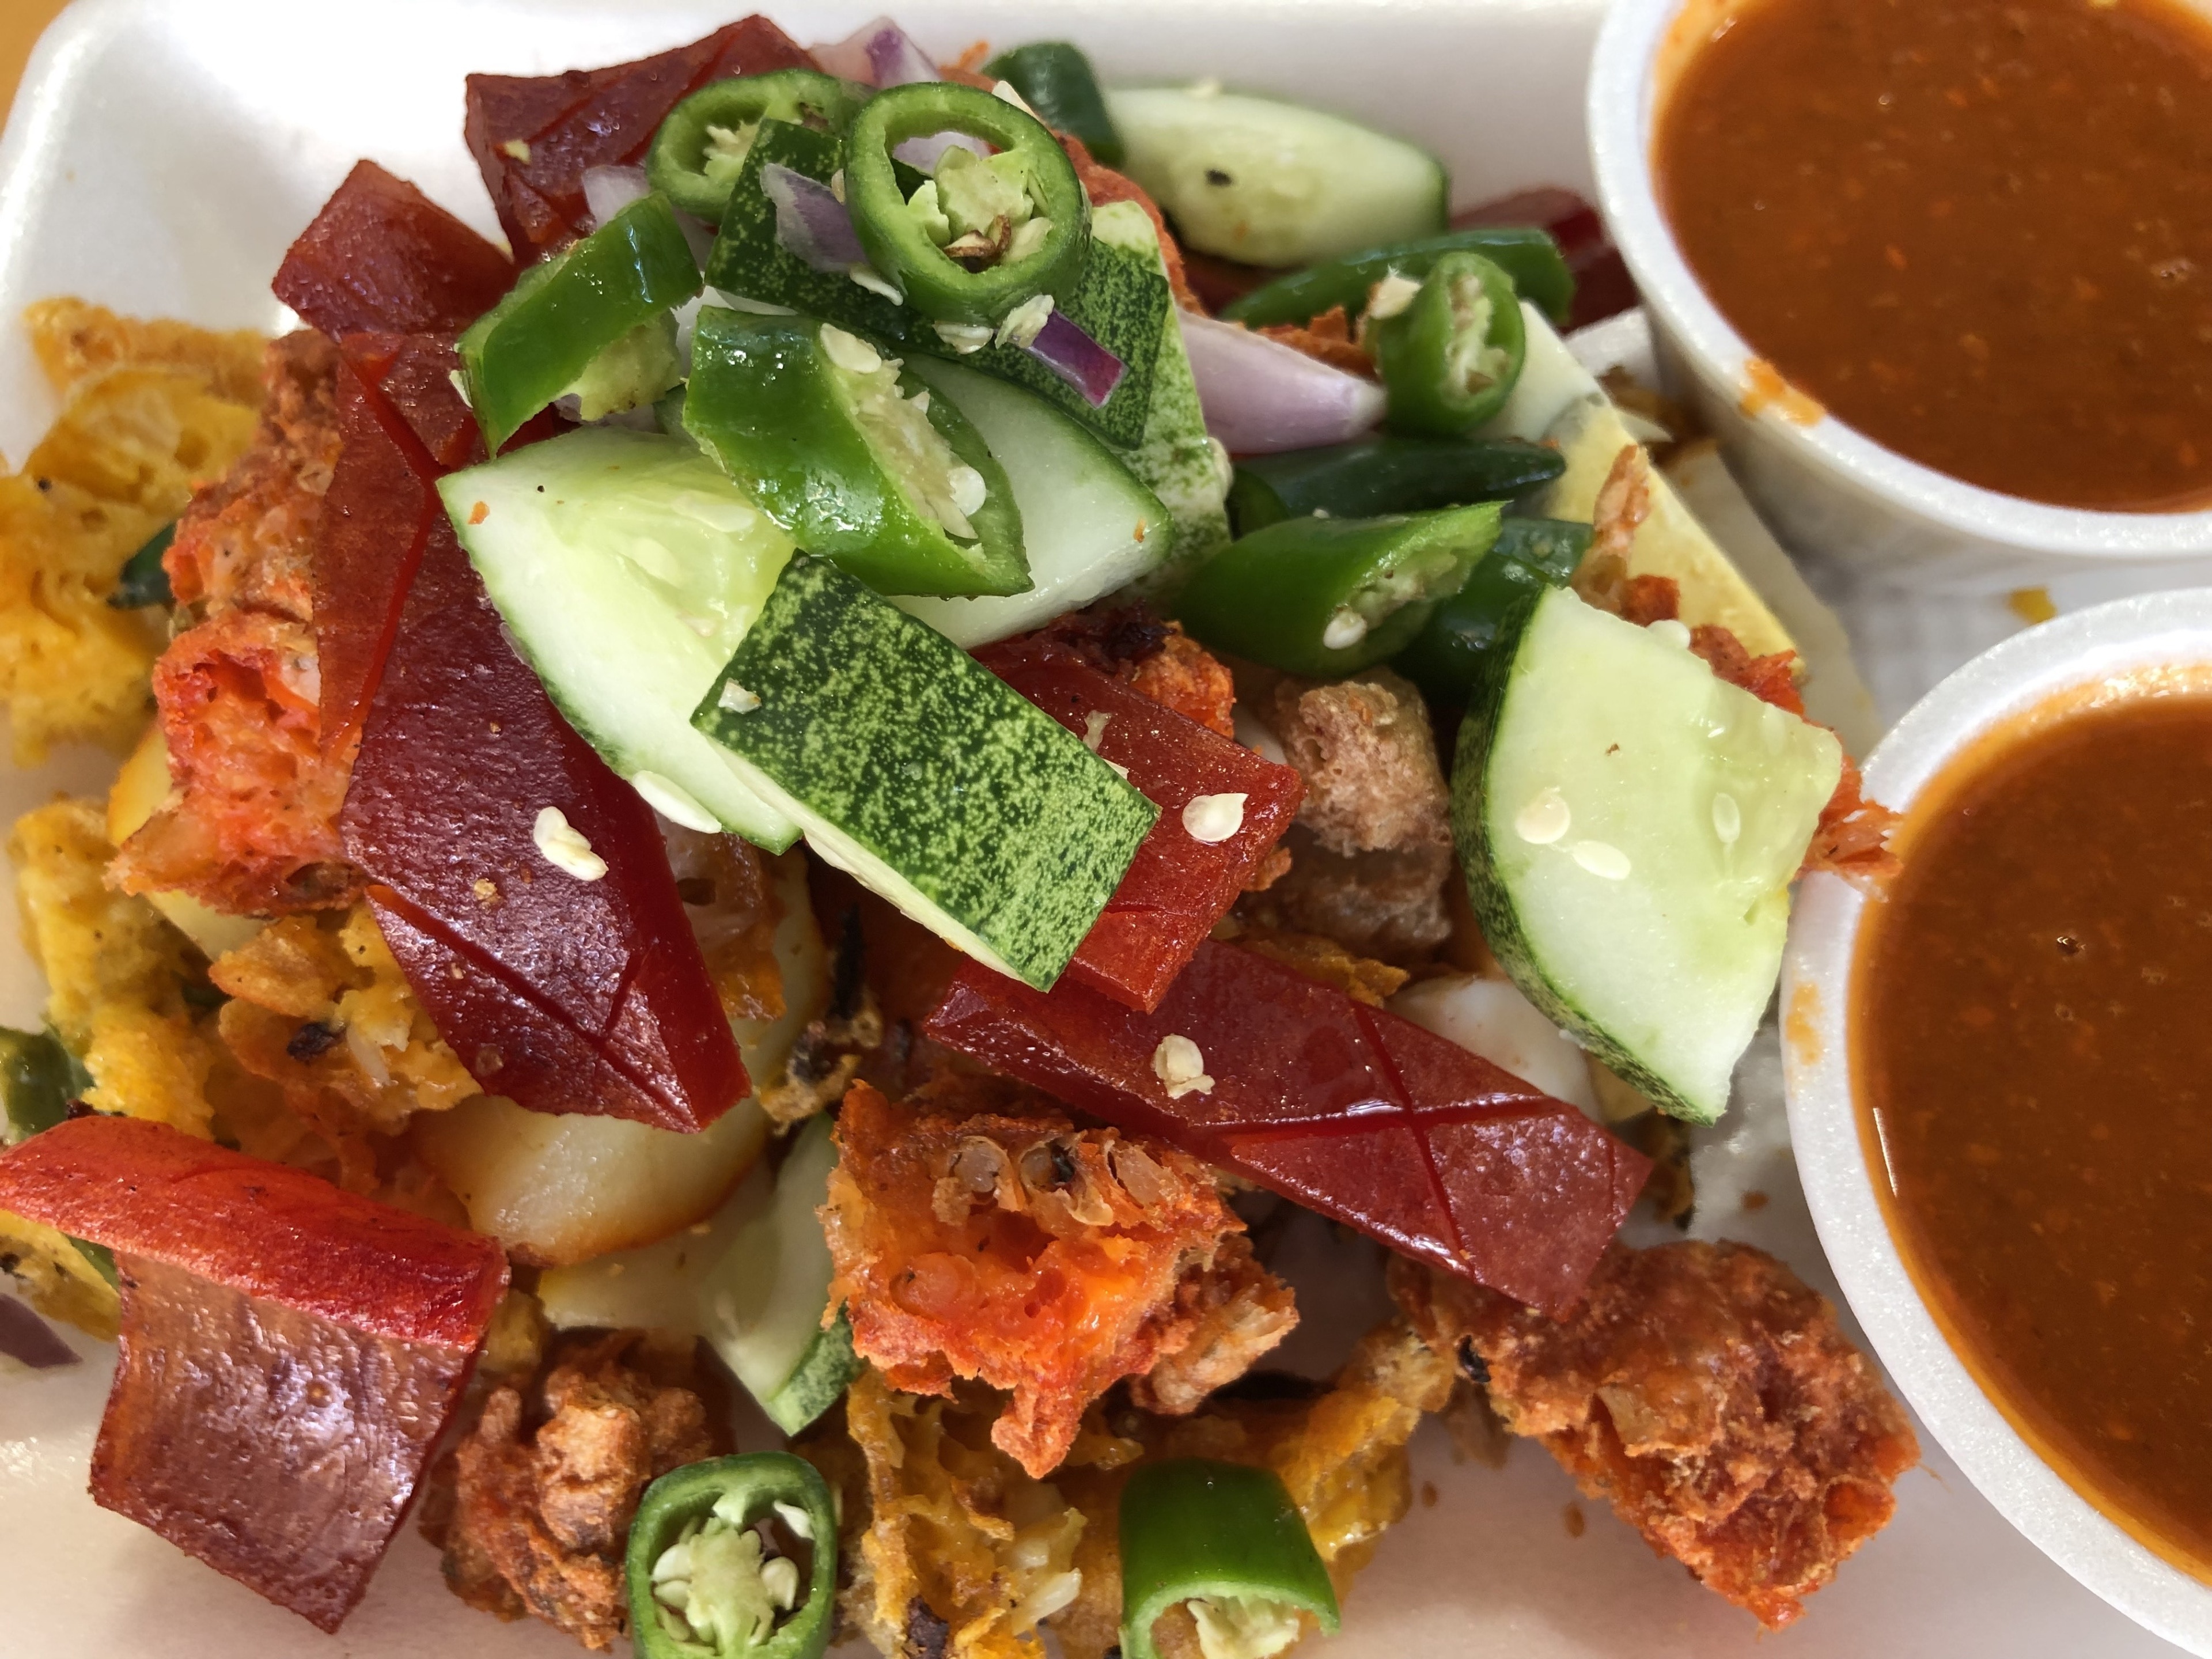 Indian Rojak was created in Singapore by early Indian immigrants. The word “rojak “ means mixed. The dish consists of fried potatoes, fried prawn fritters, fried sausages, onions, chilli and many more, which you can choose whatever you like. The red sauce consists of sweet potatoes and spices. It’s a favourite amongst the locals. 

#TroverFoodies #Culture Photo Contest #Trovember